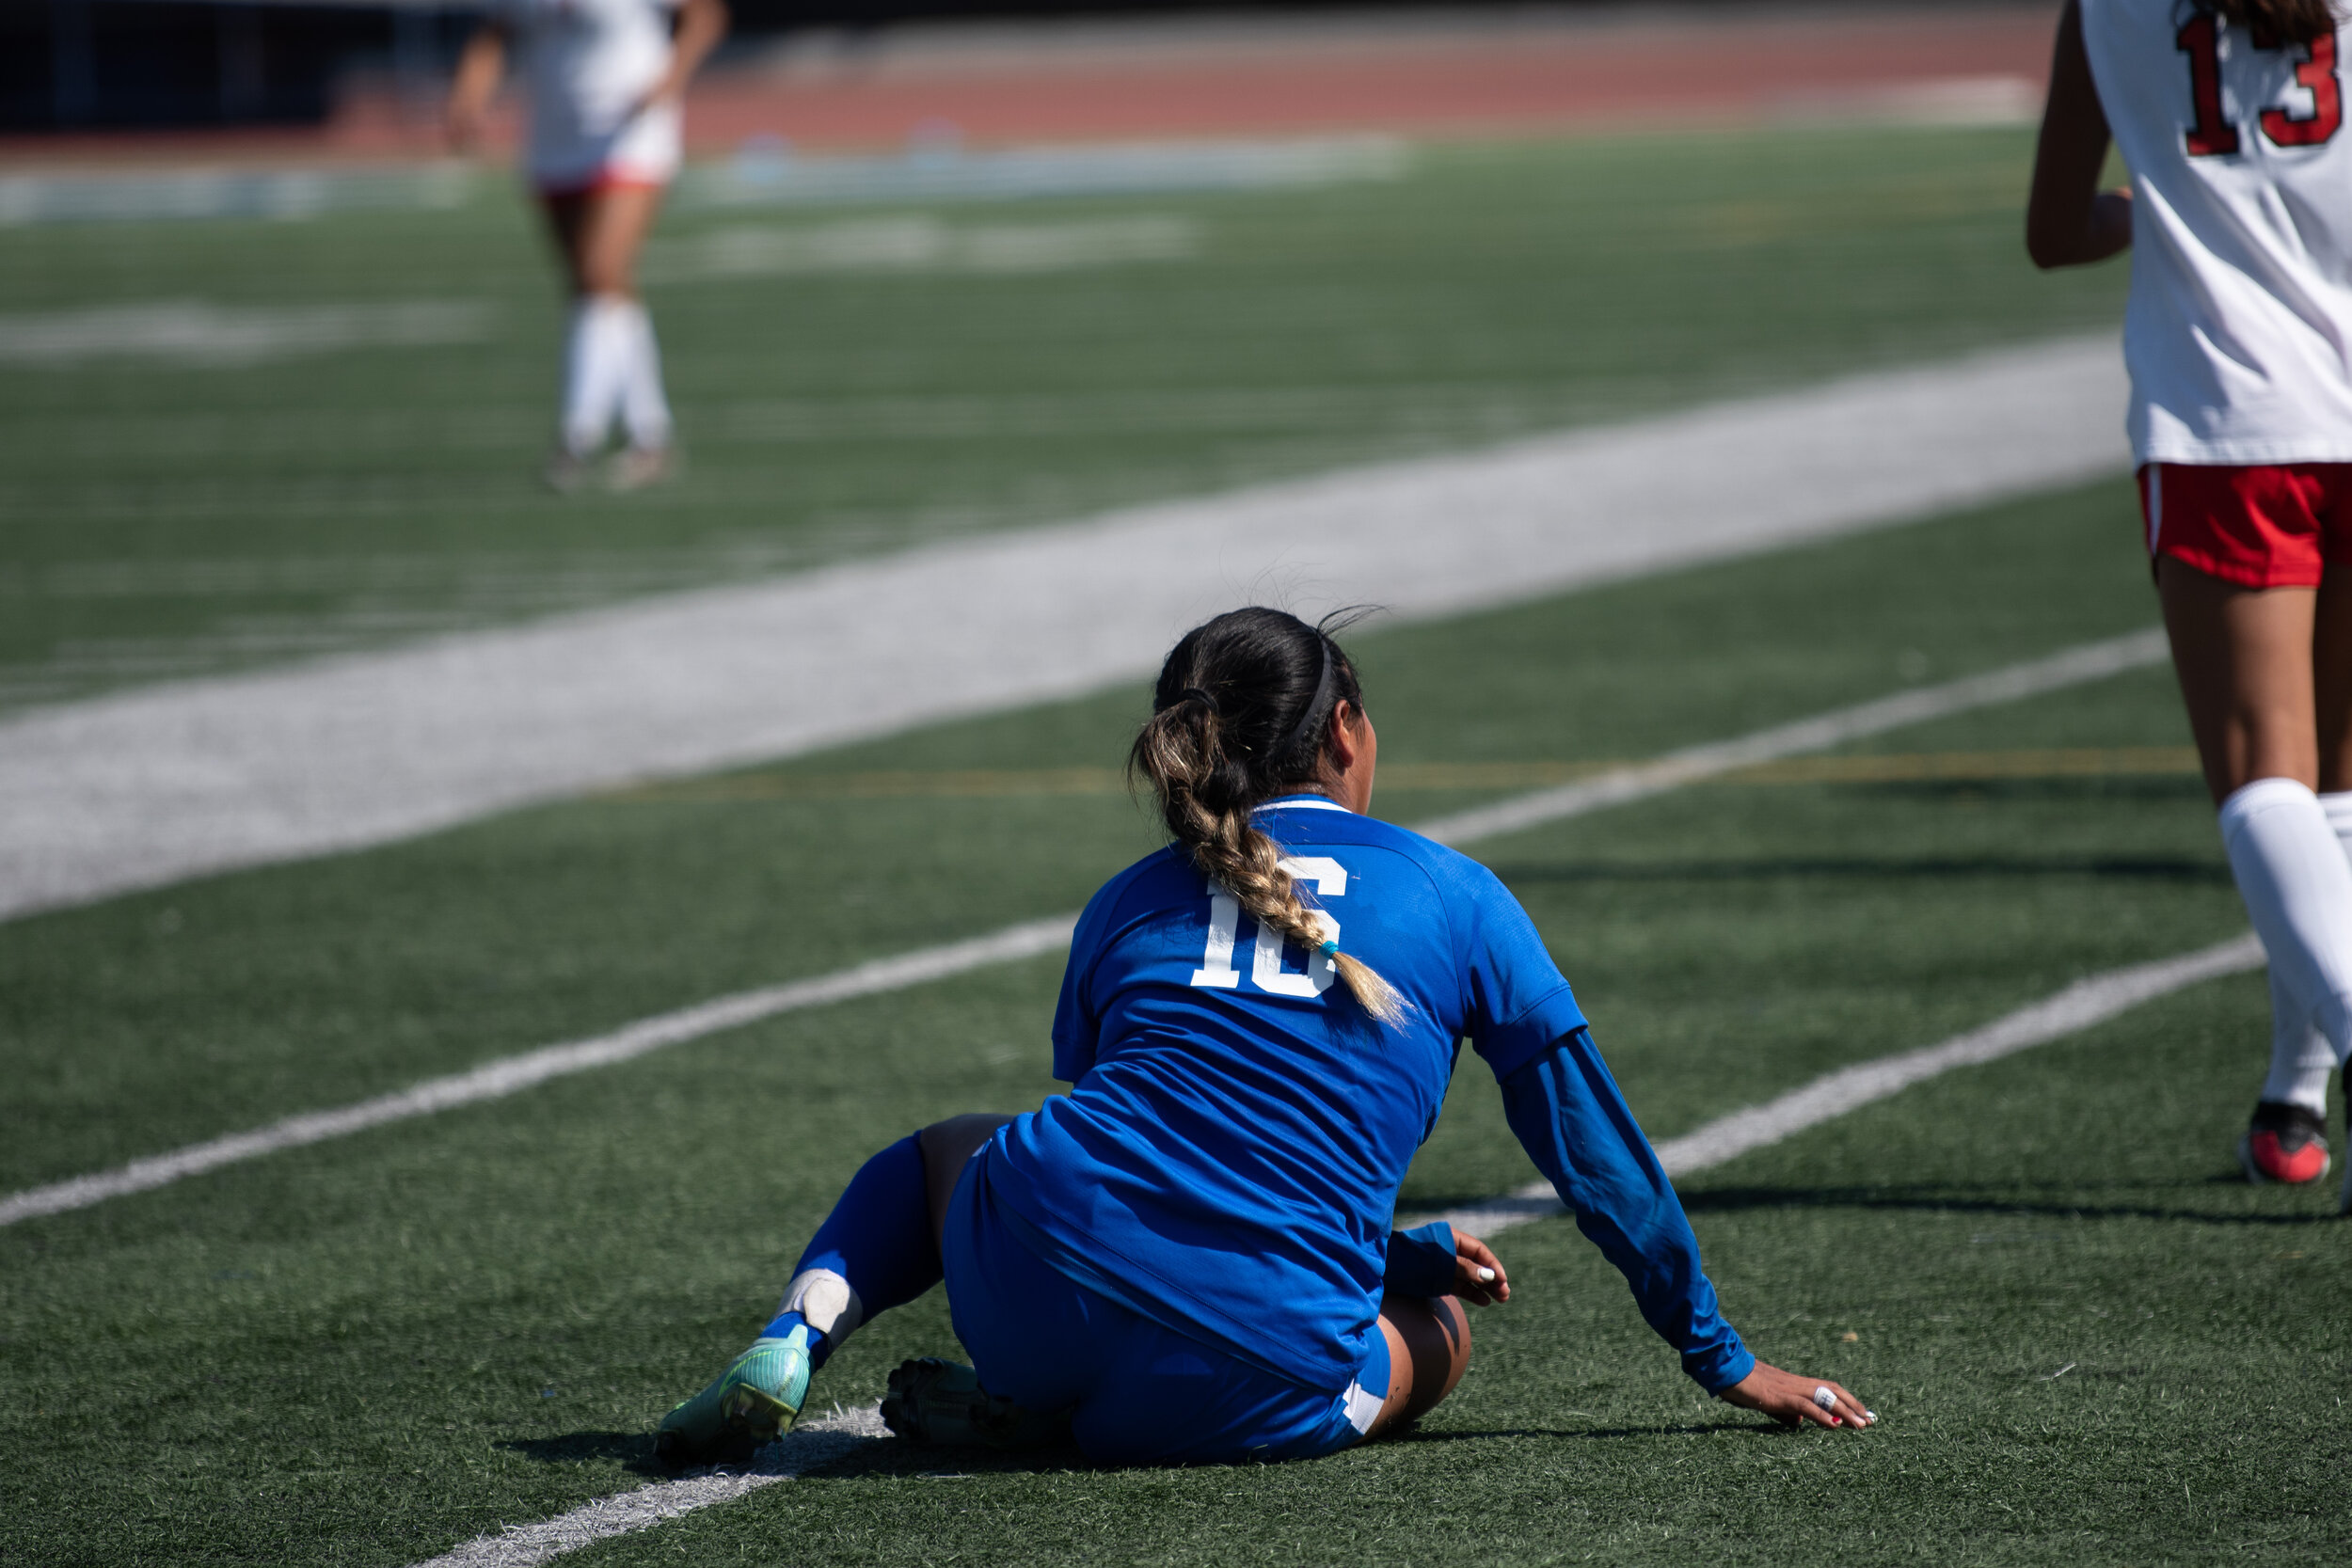  Diana Gaspar of the Santa Monica College Corsairs recovers from a harsh hit on the Santa Monica College Corsair Field in Santa Monica, Calif. on September 10, 2021. The match against Chaffey is their third game of the year, and their second proper g